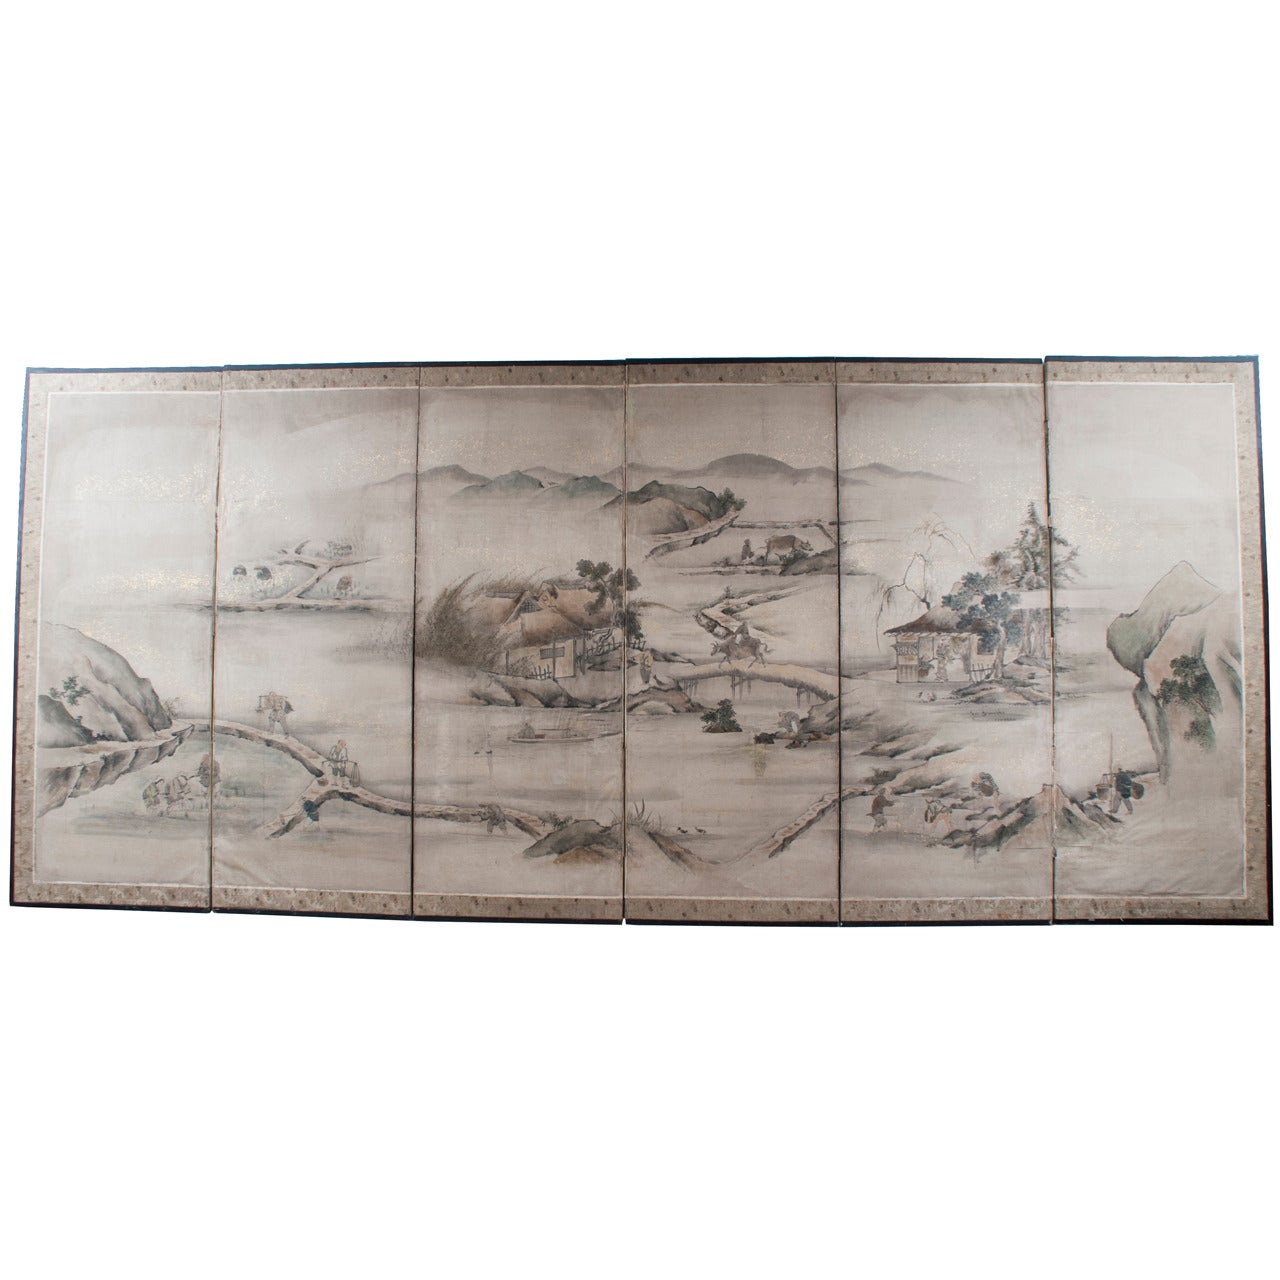 Six-Panel Japanese Screen Depicting a Chinese Landscape